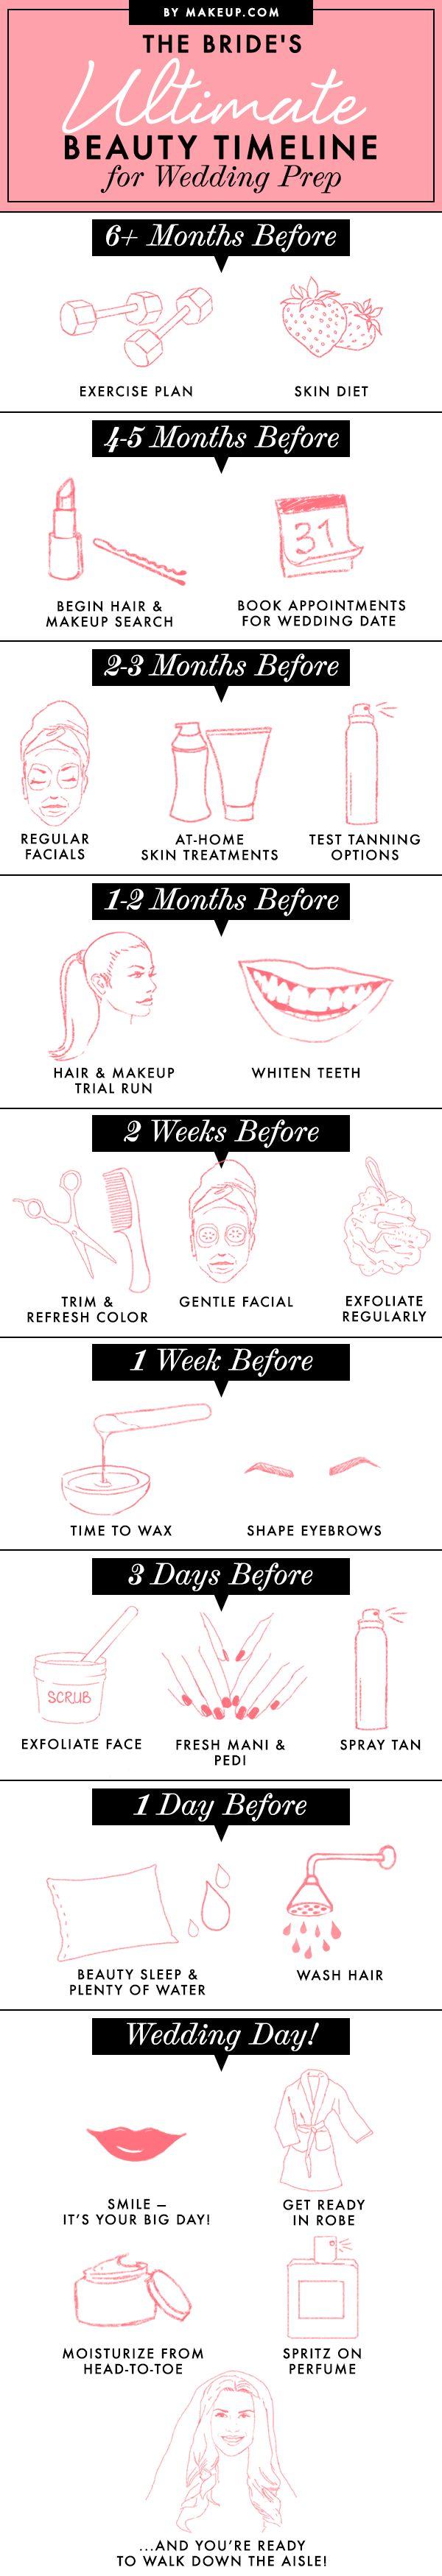 Wedding - The Bride's Ultimate Beauty Timeline For Wedding Prep